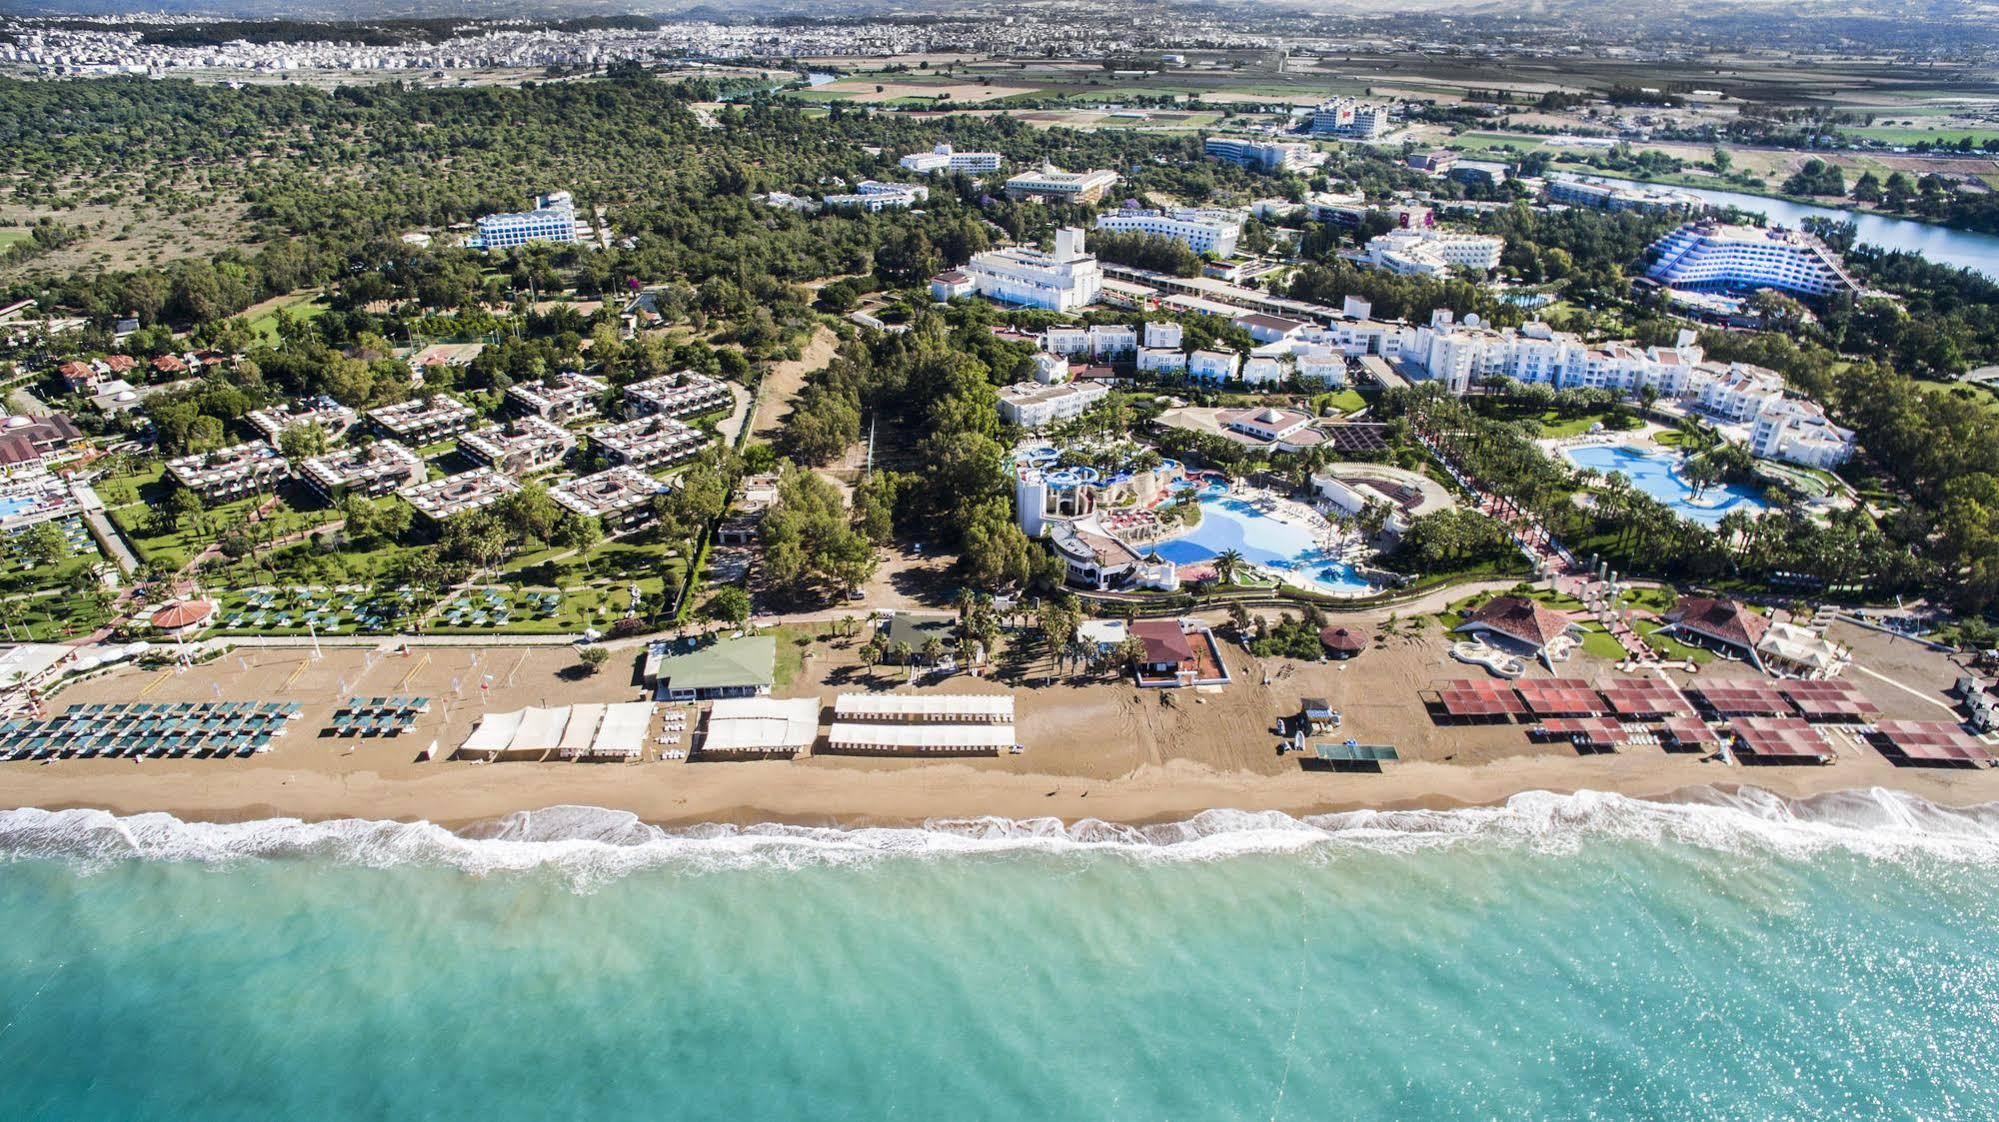 Side Ally Hotel - Her Şey Dahil (Side Ally Hotel - All Inclusive)